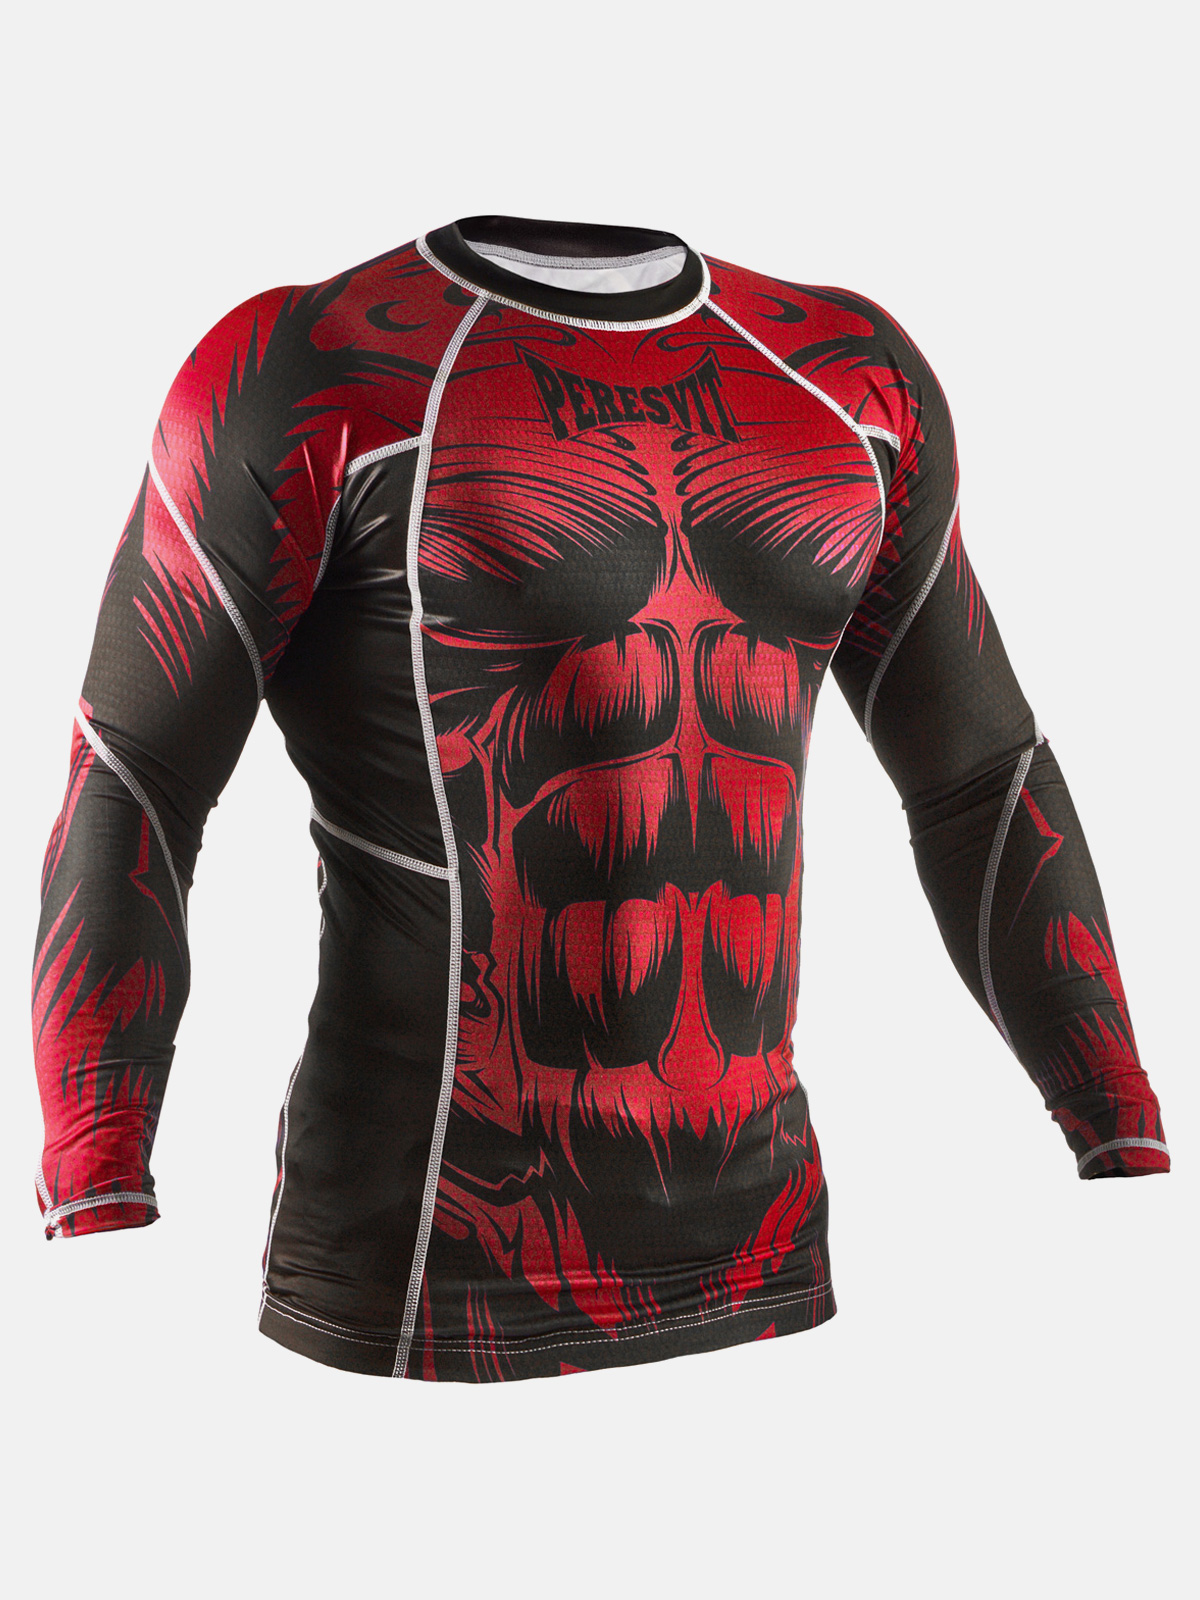 Peresvit Beast Silver Force Long Sleeve Red, Photo No. 2